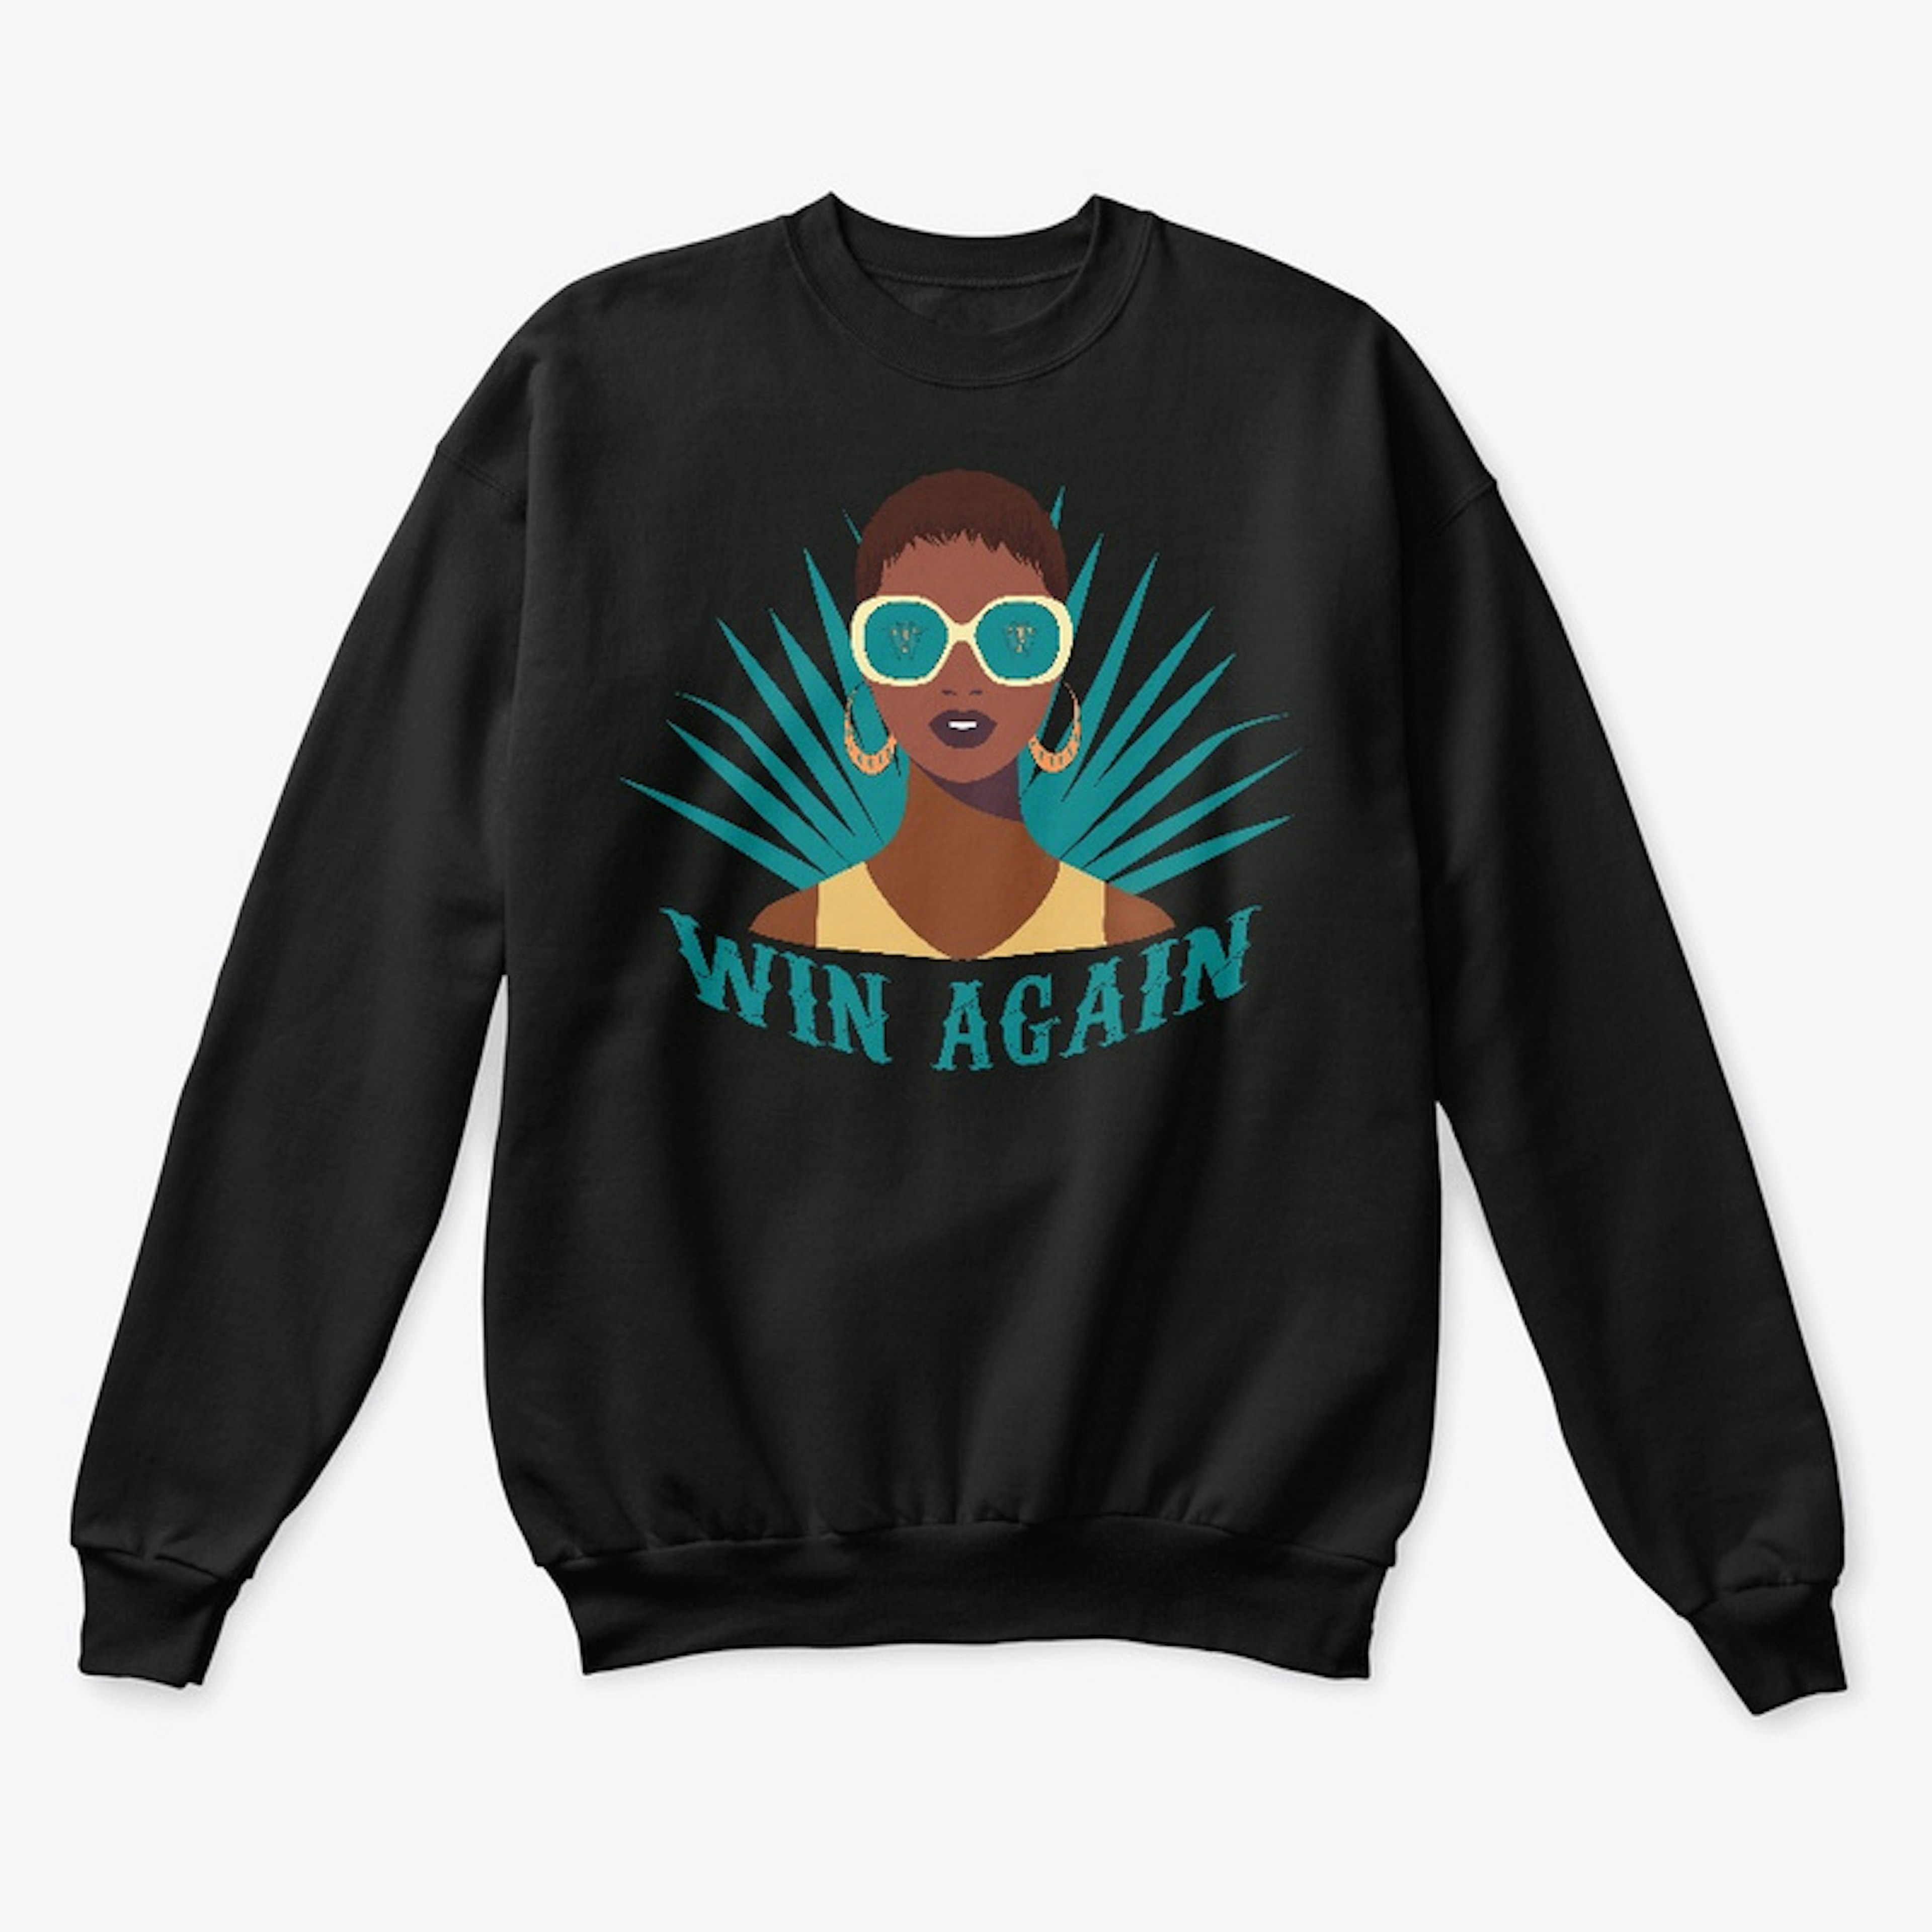 Win Again Apparel and Accessories